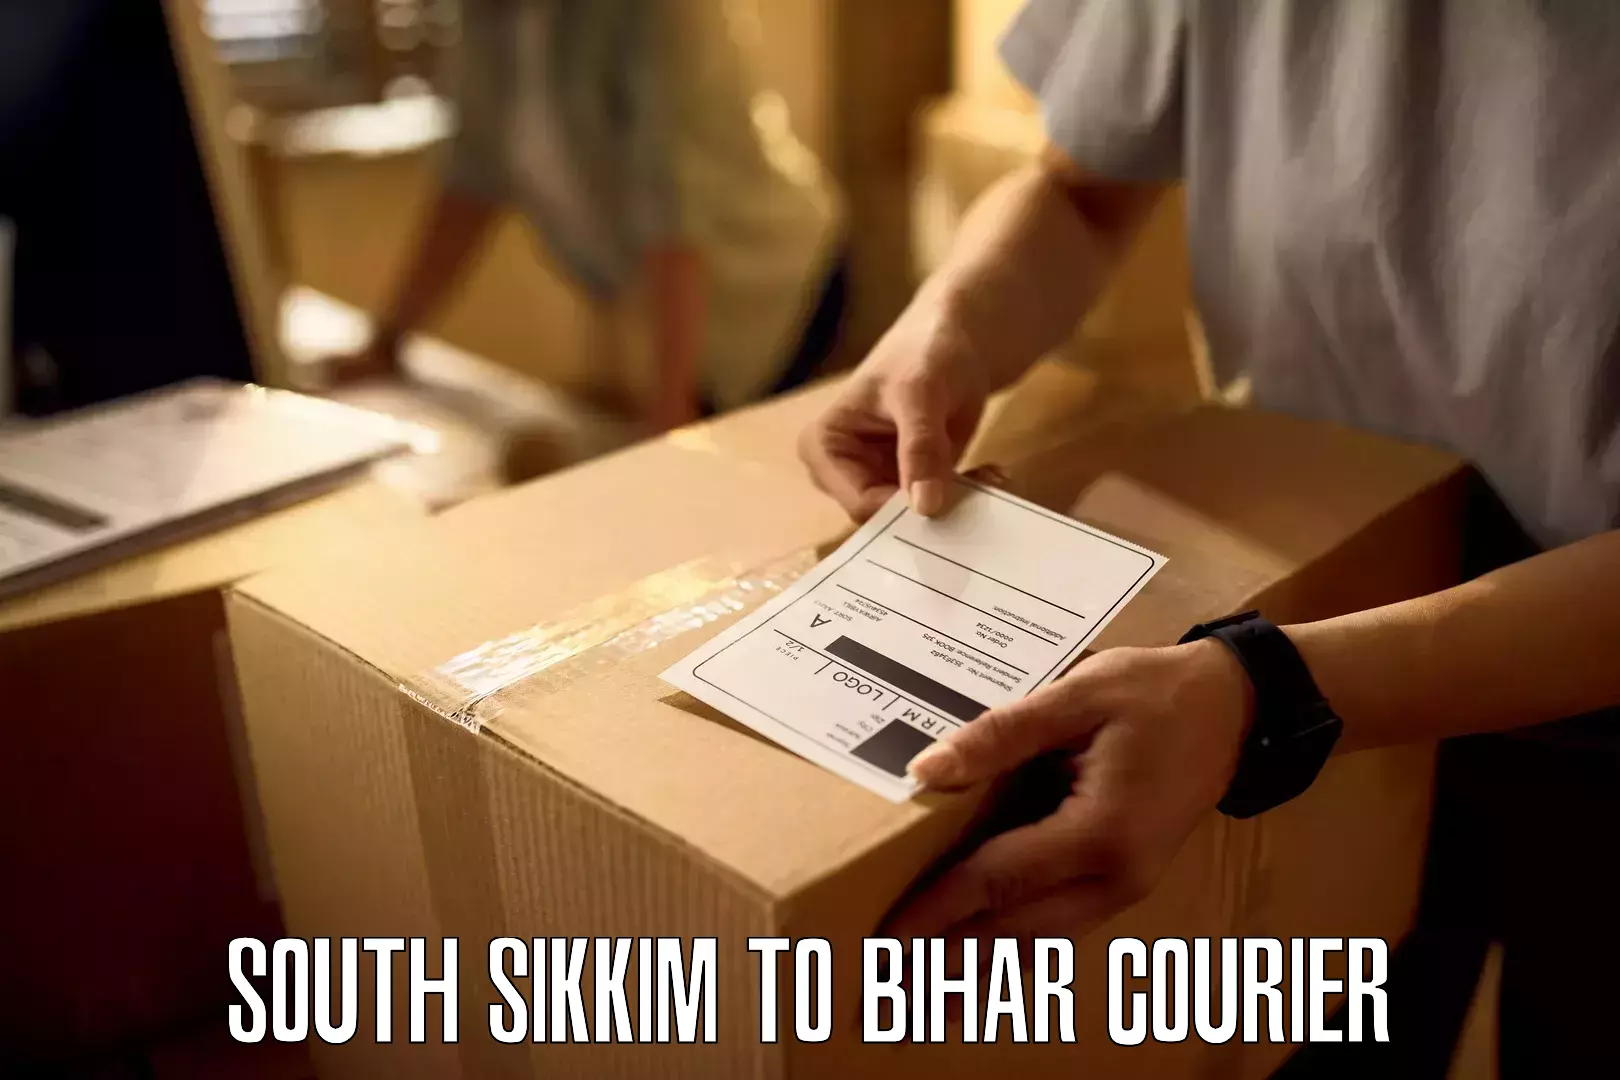 User-friendly delivery service South Sikkim to Bhojpur